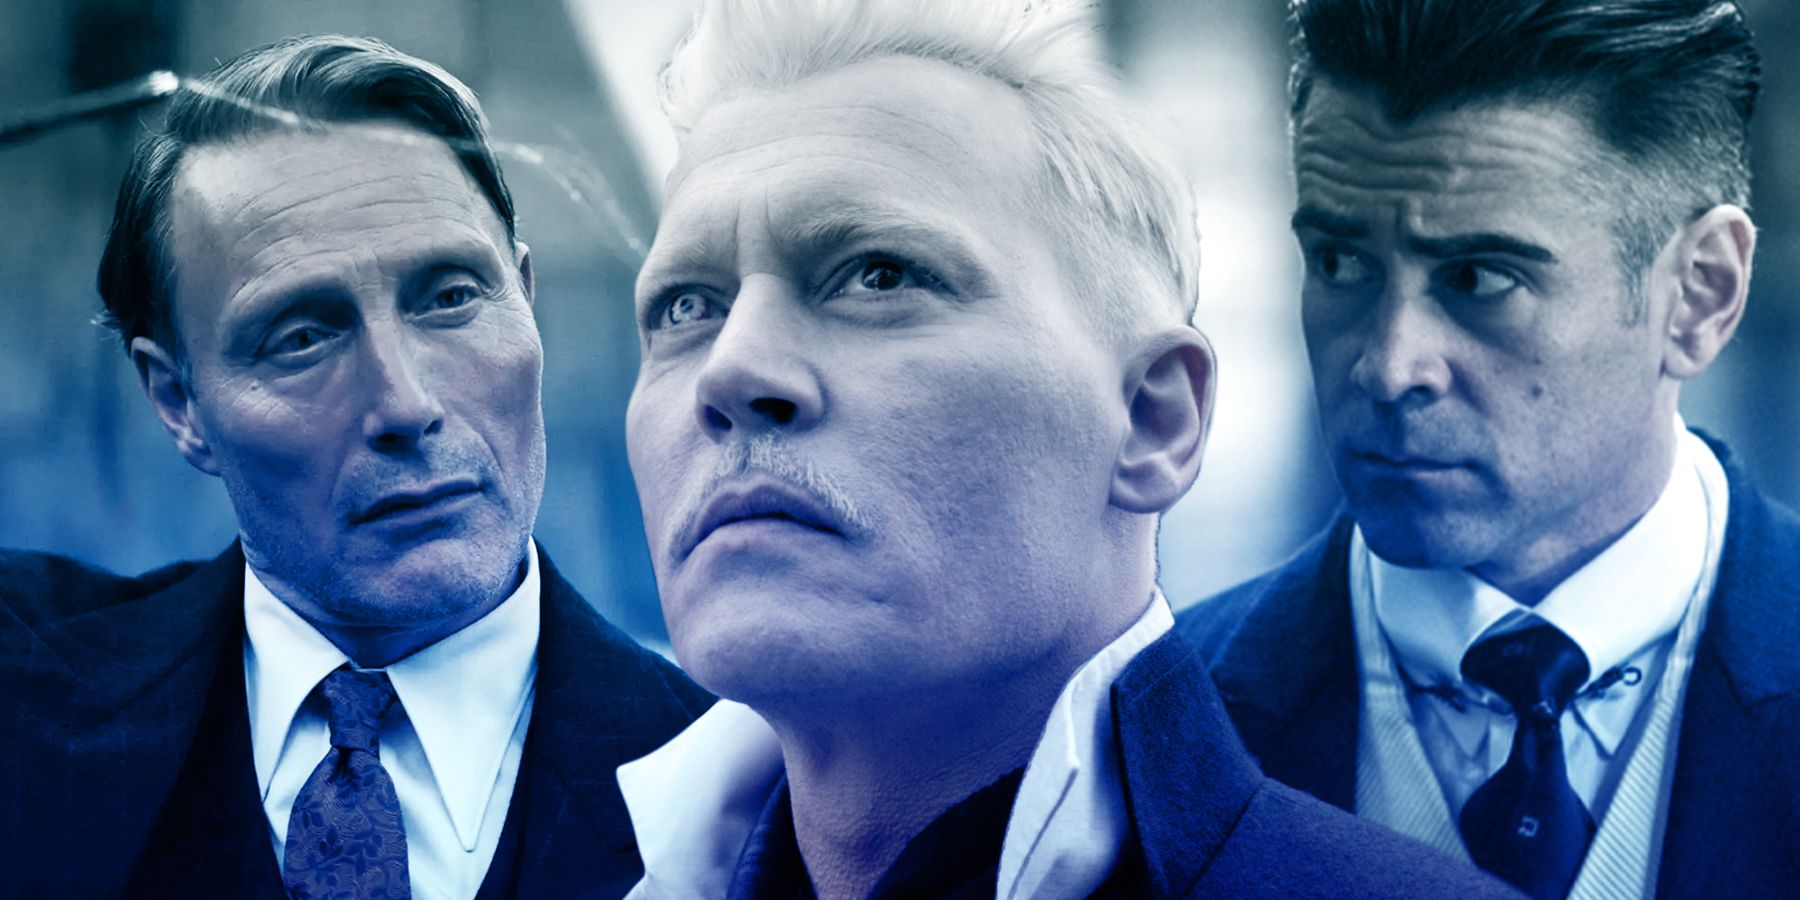 Farrell, Depp and Mikkelsen has different versions of Grindelwald